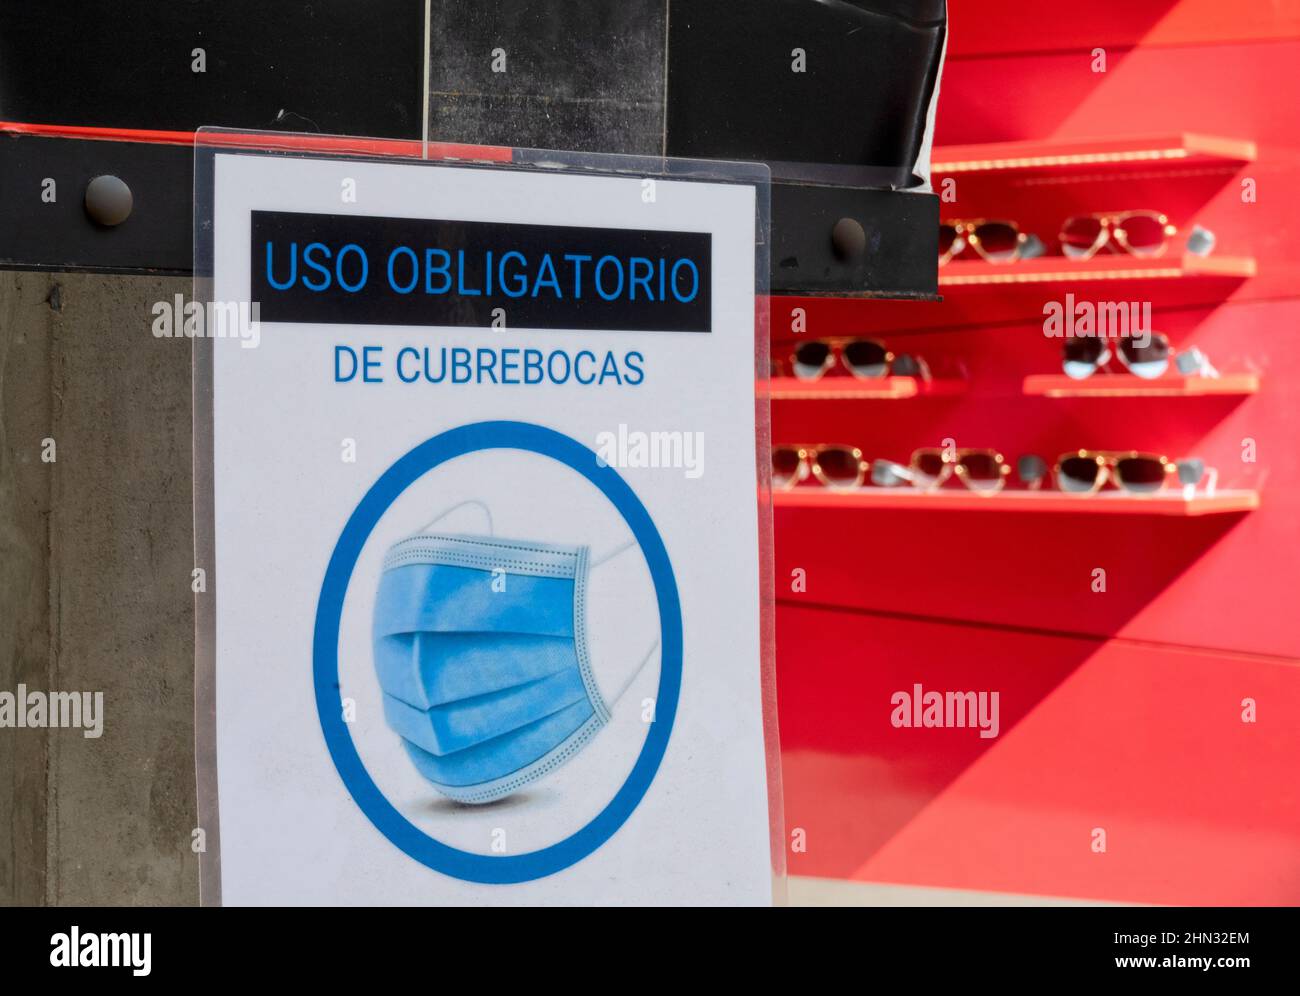 Warning sign at the entrance of an eyeglasses store Symbol shows Wearing a Mask is required in the Spanish language Stock Photo